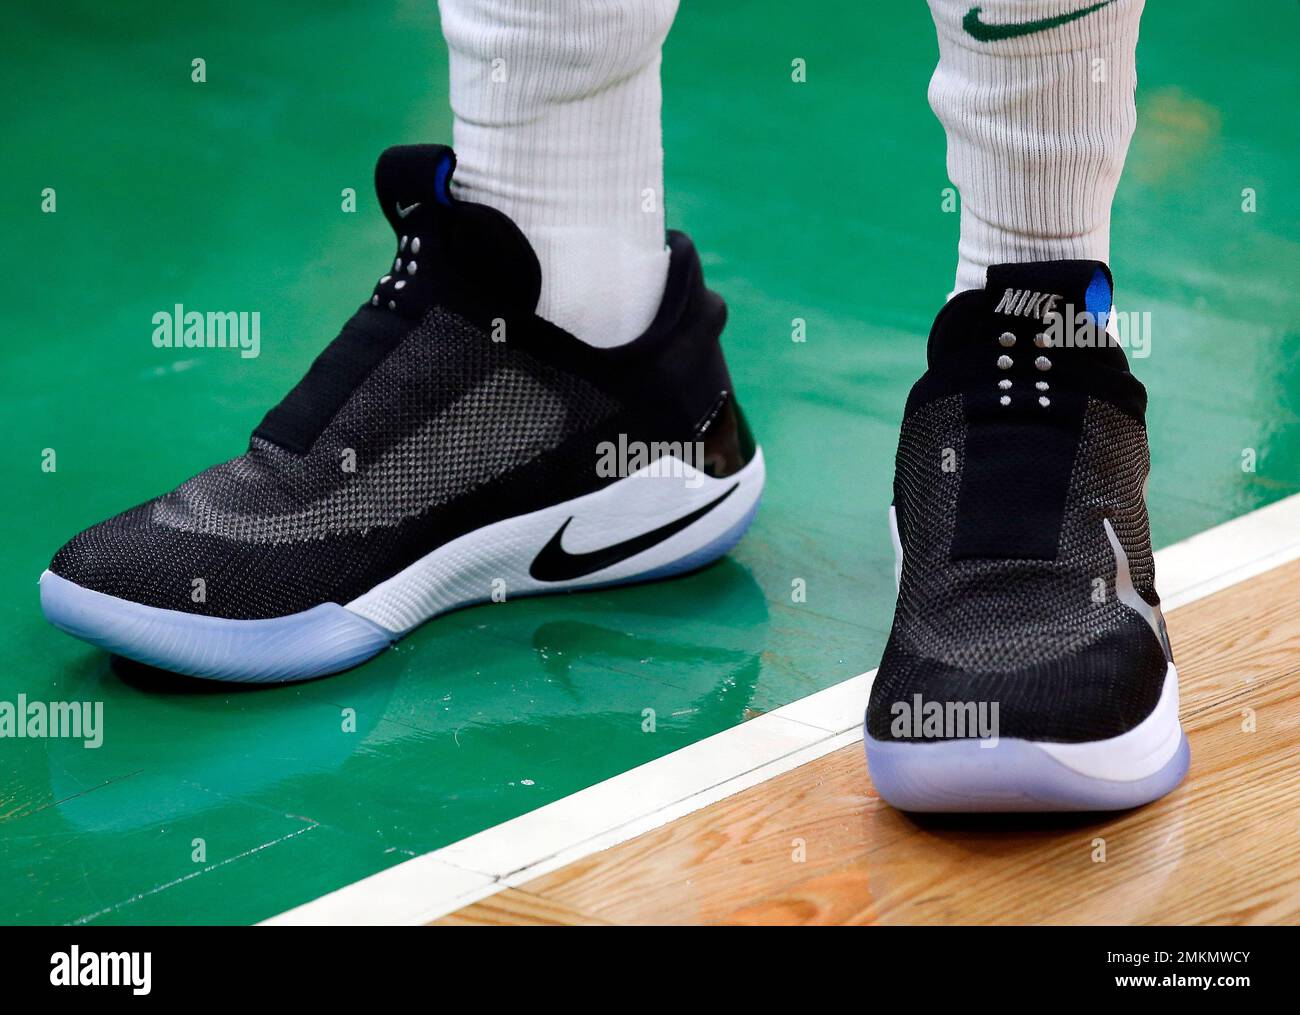 The auto-lacing Nike HyperAdapt BB shoes of Boston Celtics' Jayson Tatum  are seen as he warms up before their NBA basketball game against the Miami  Heat Monday, Jan. 21, 2019, in Boston. (